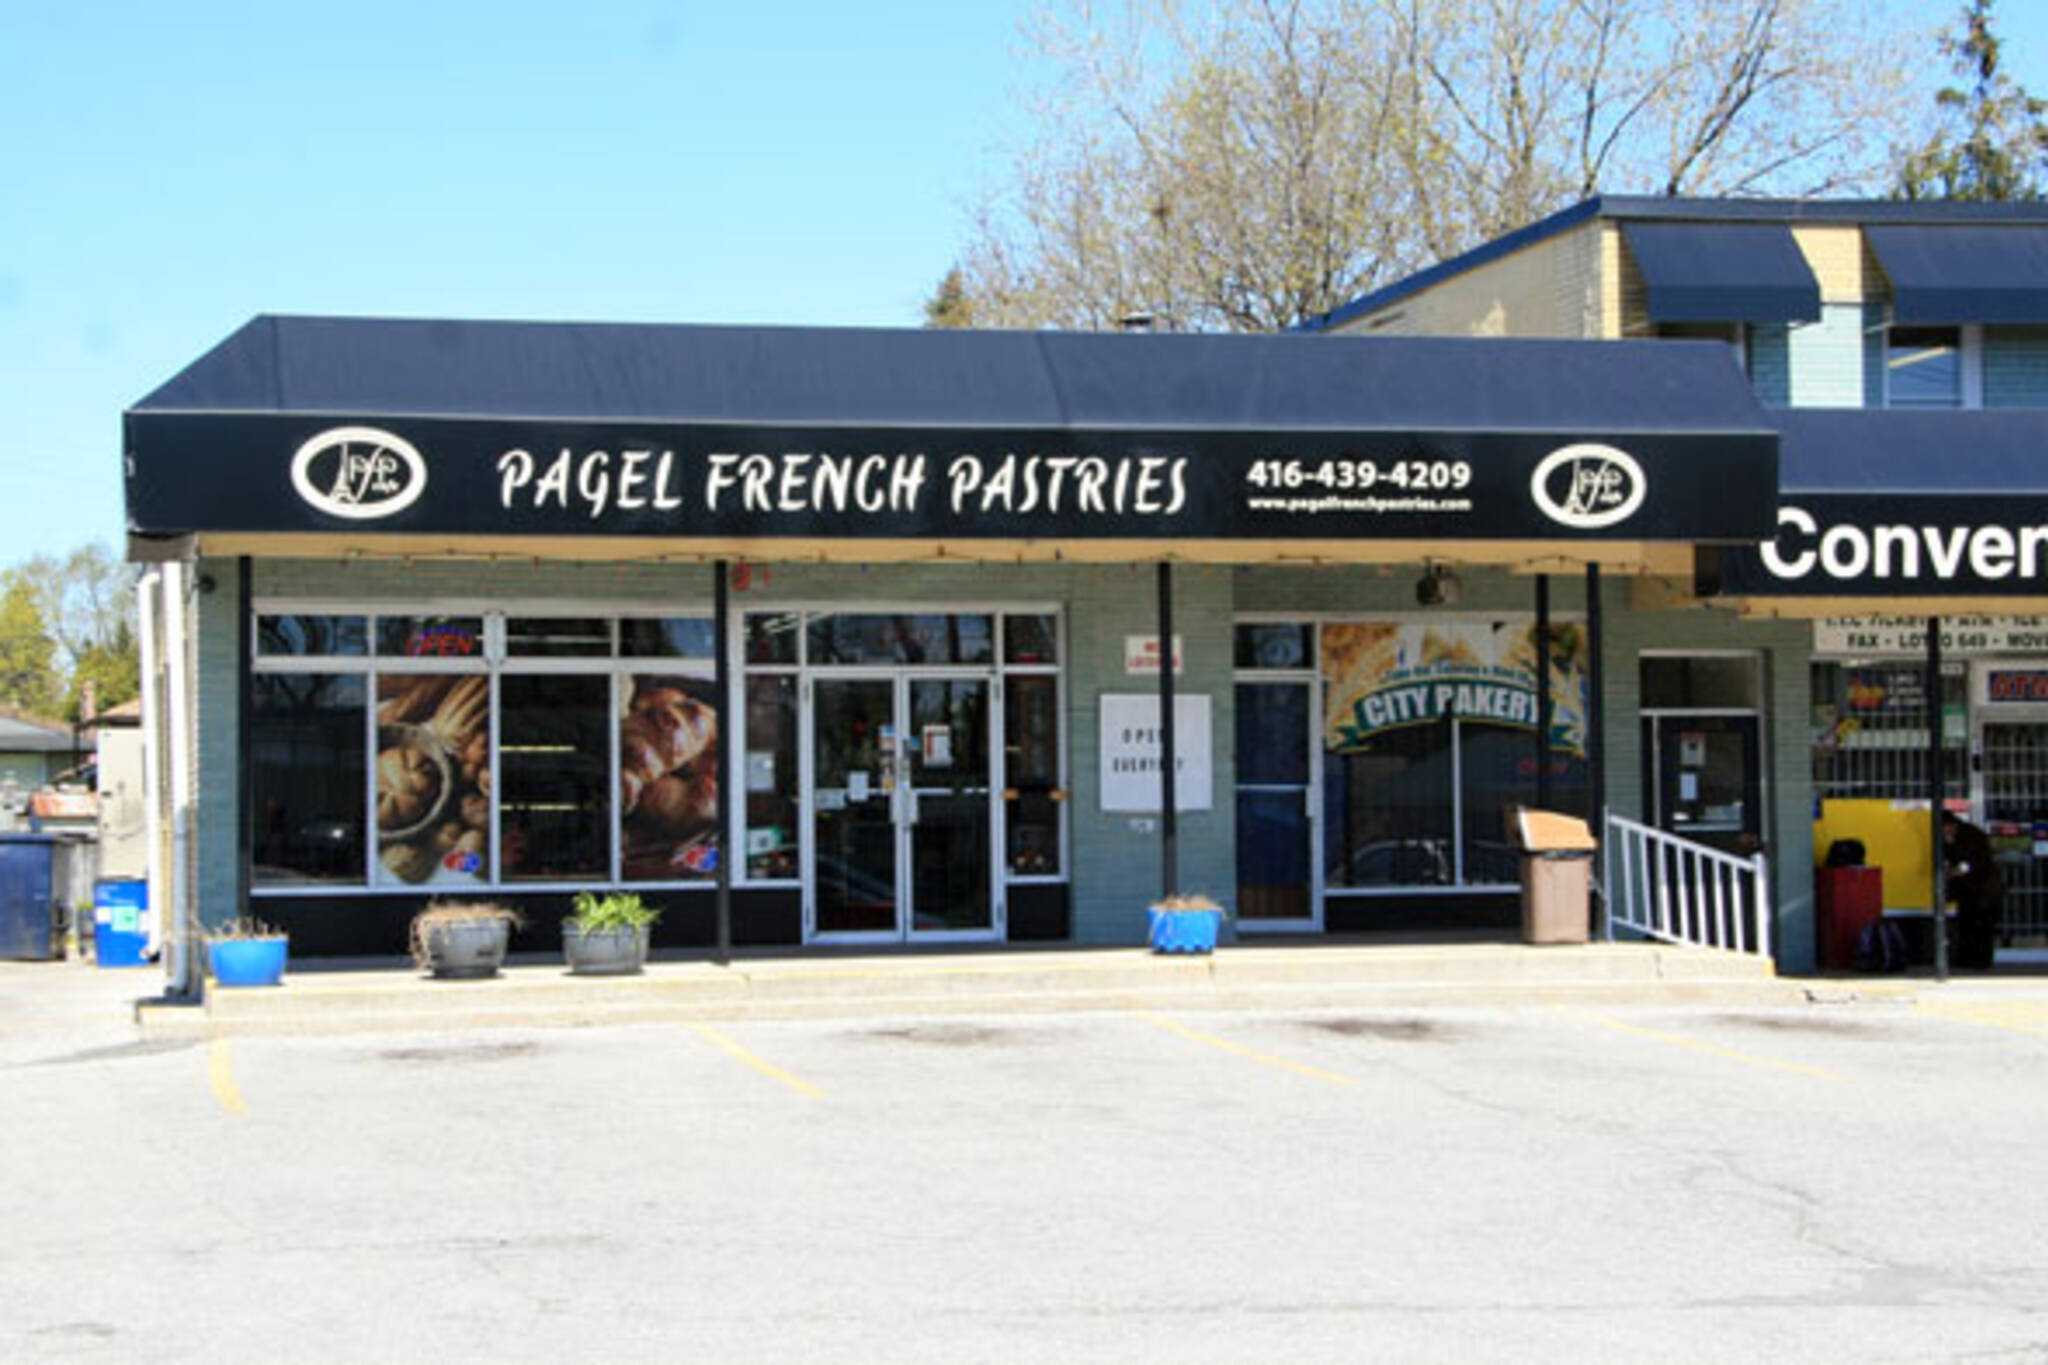 Pagel French Pastries